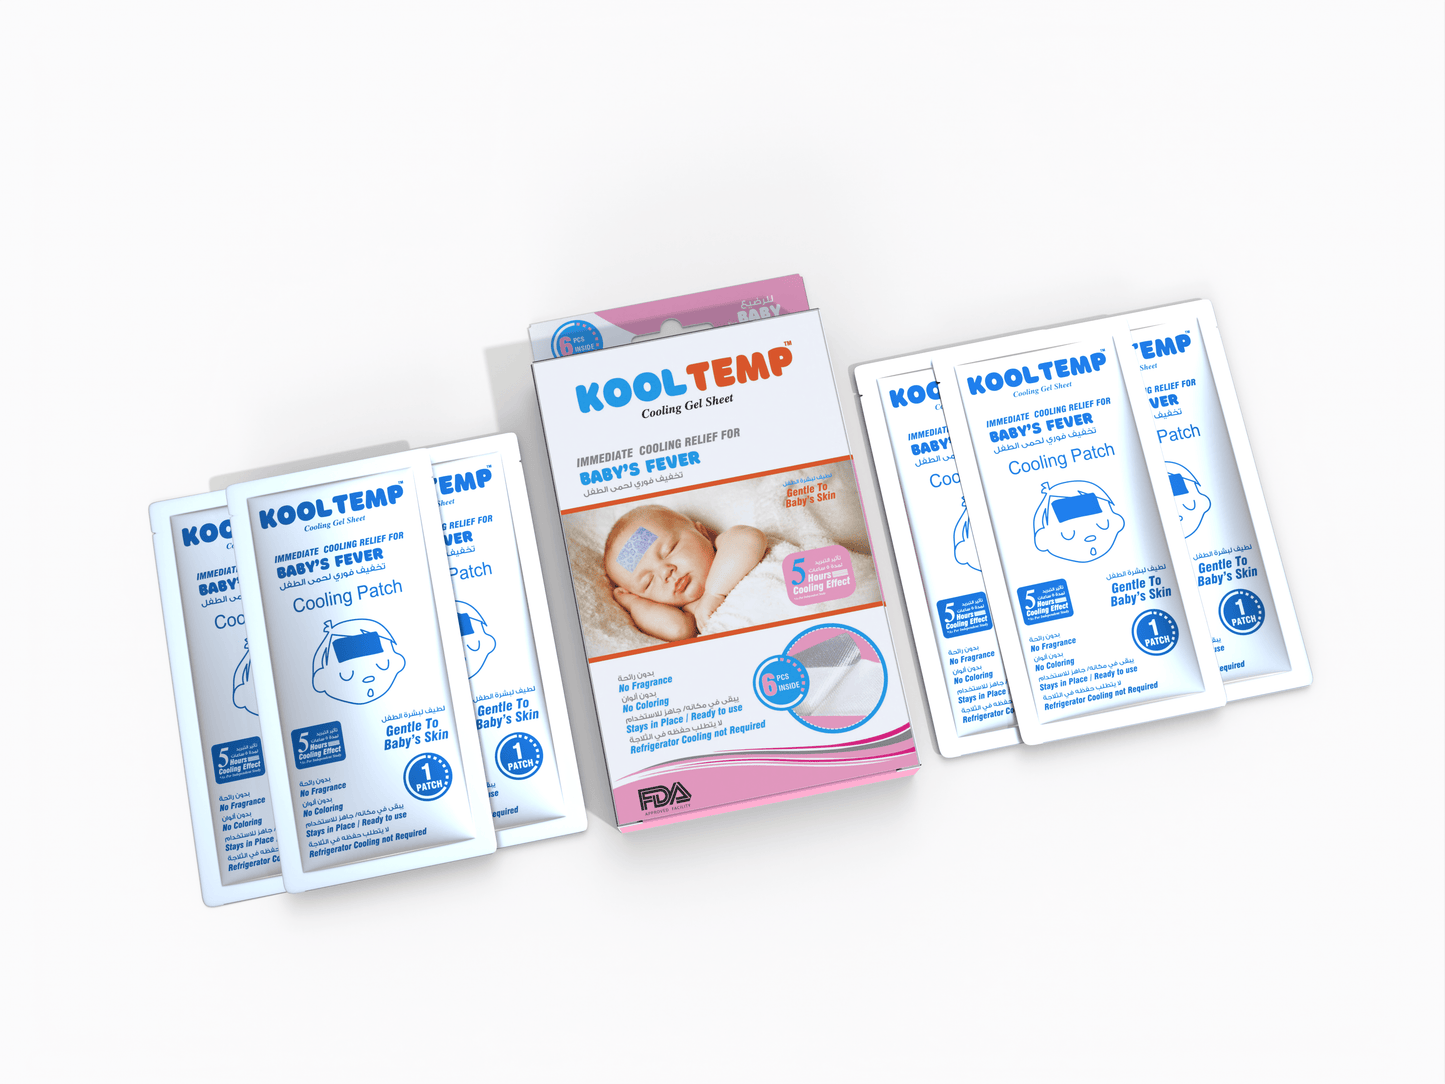 Kool Temp for Babies (0 to 2 years) - Six cooling patches for fever